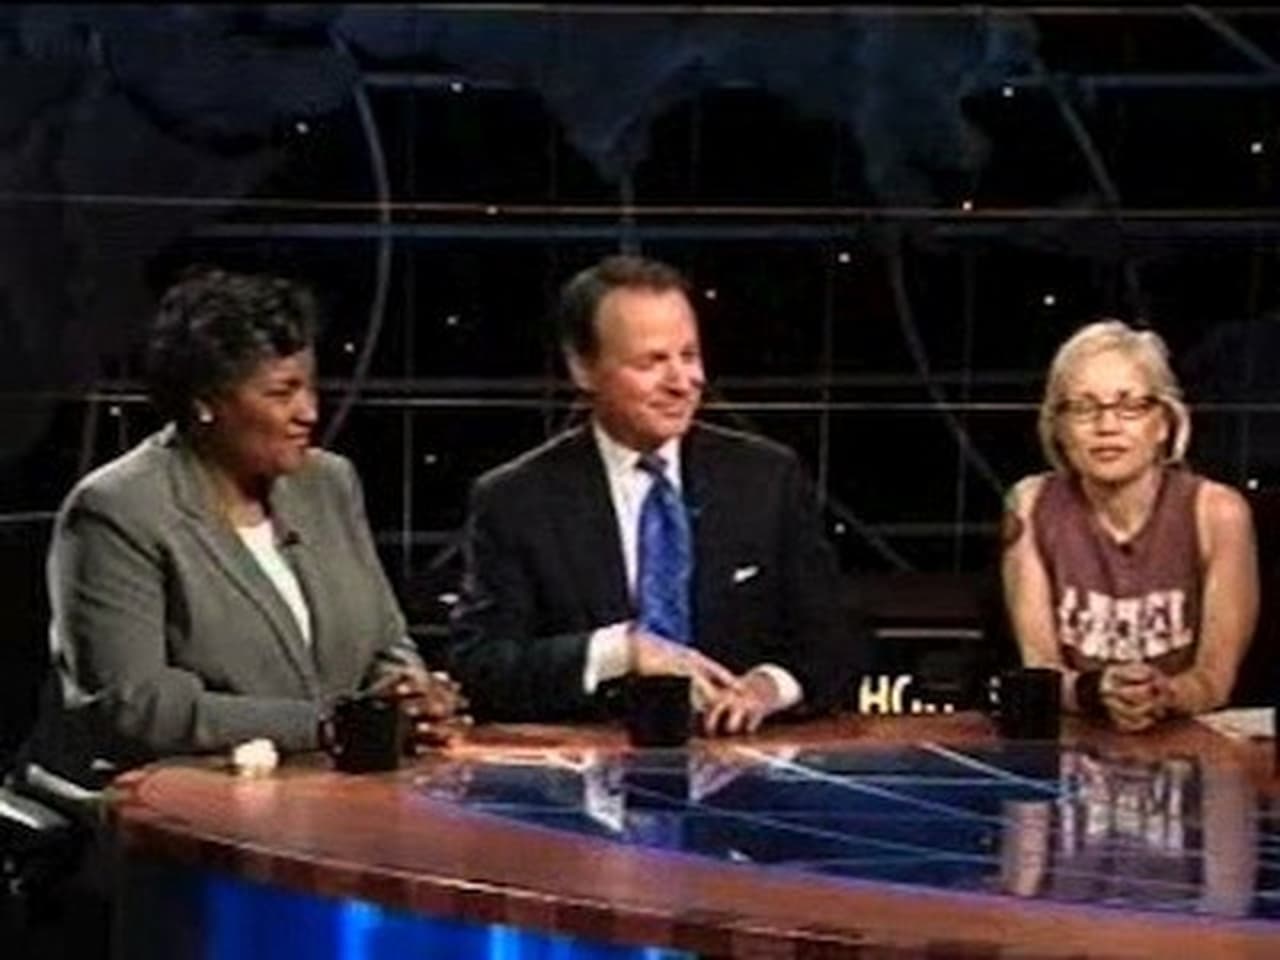 Real Time with Bill Maher - Season 1 Episode 13 : August 08, 2003